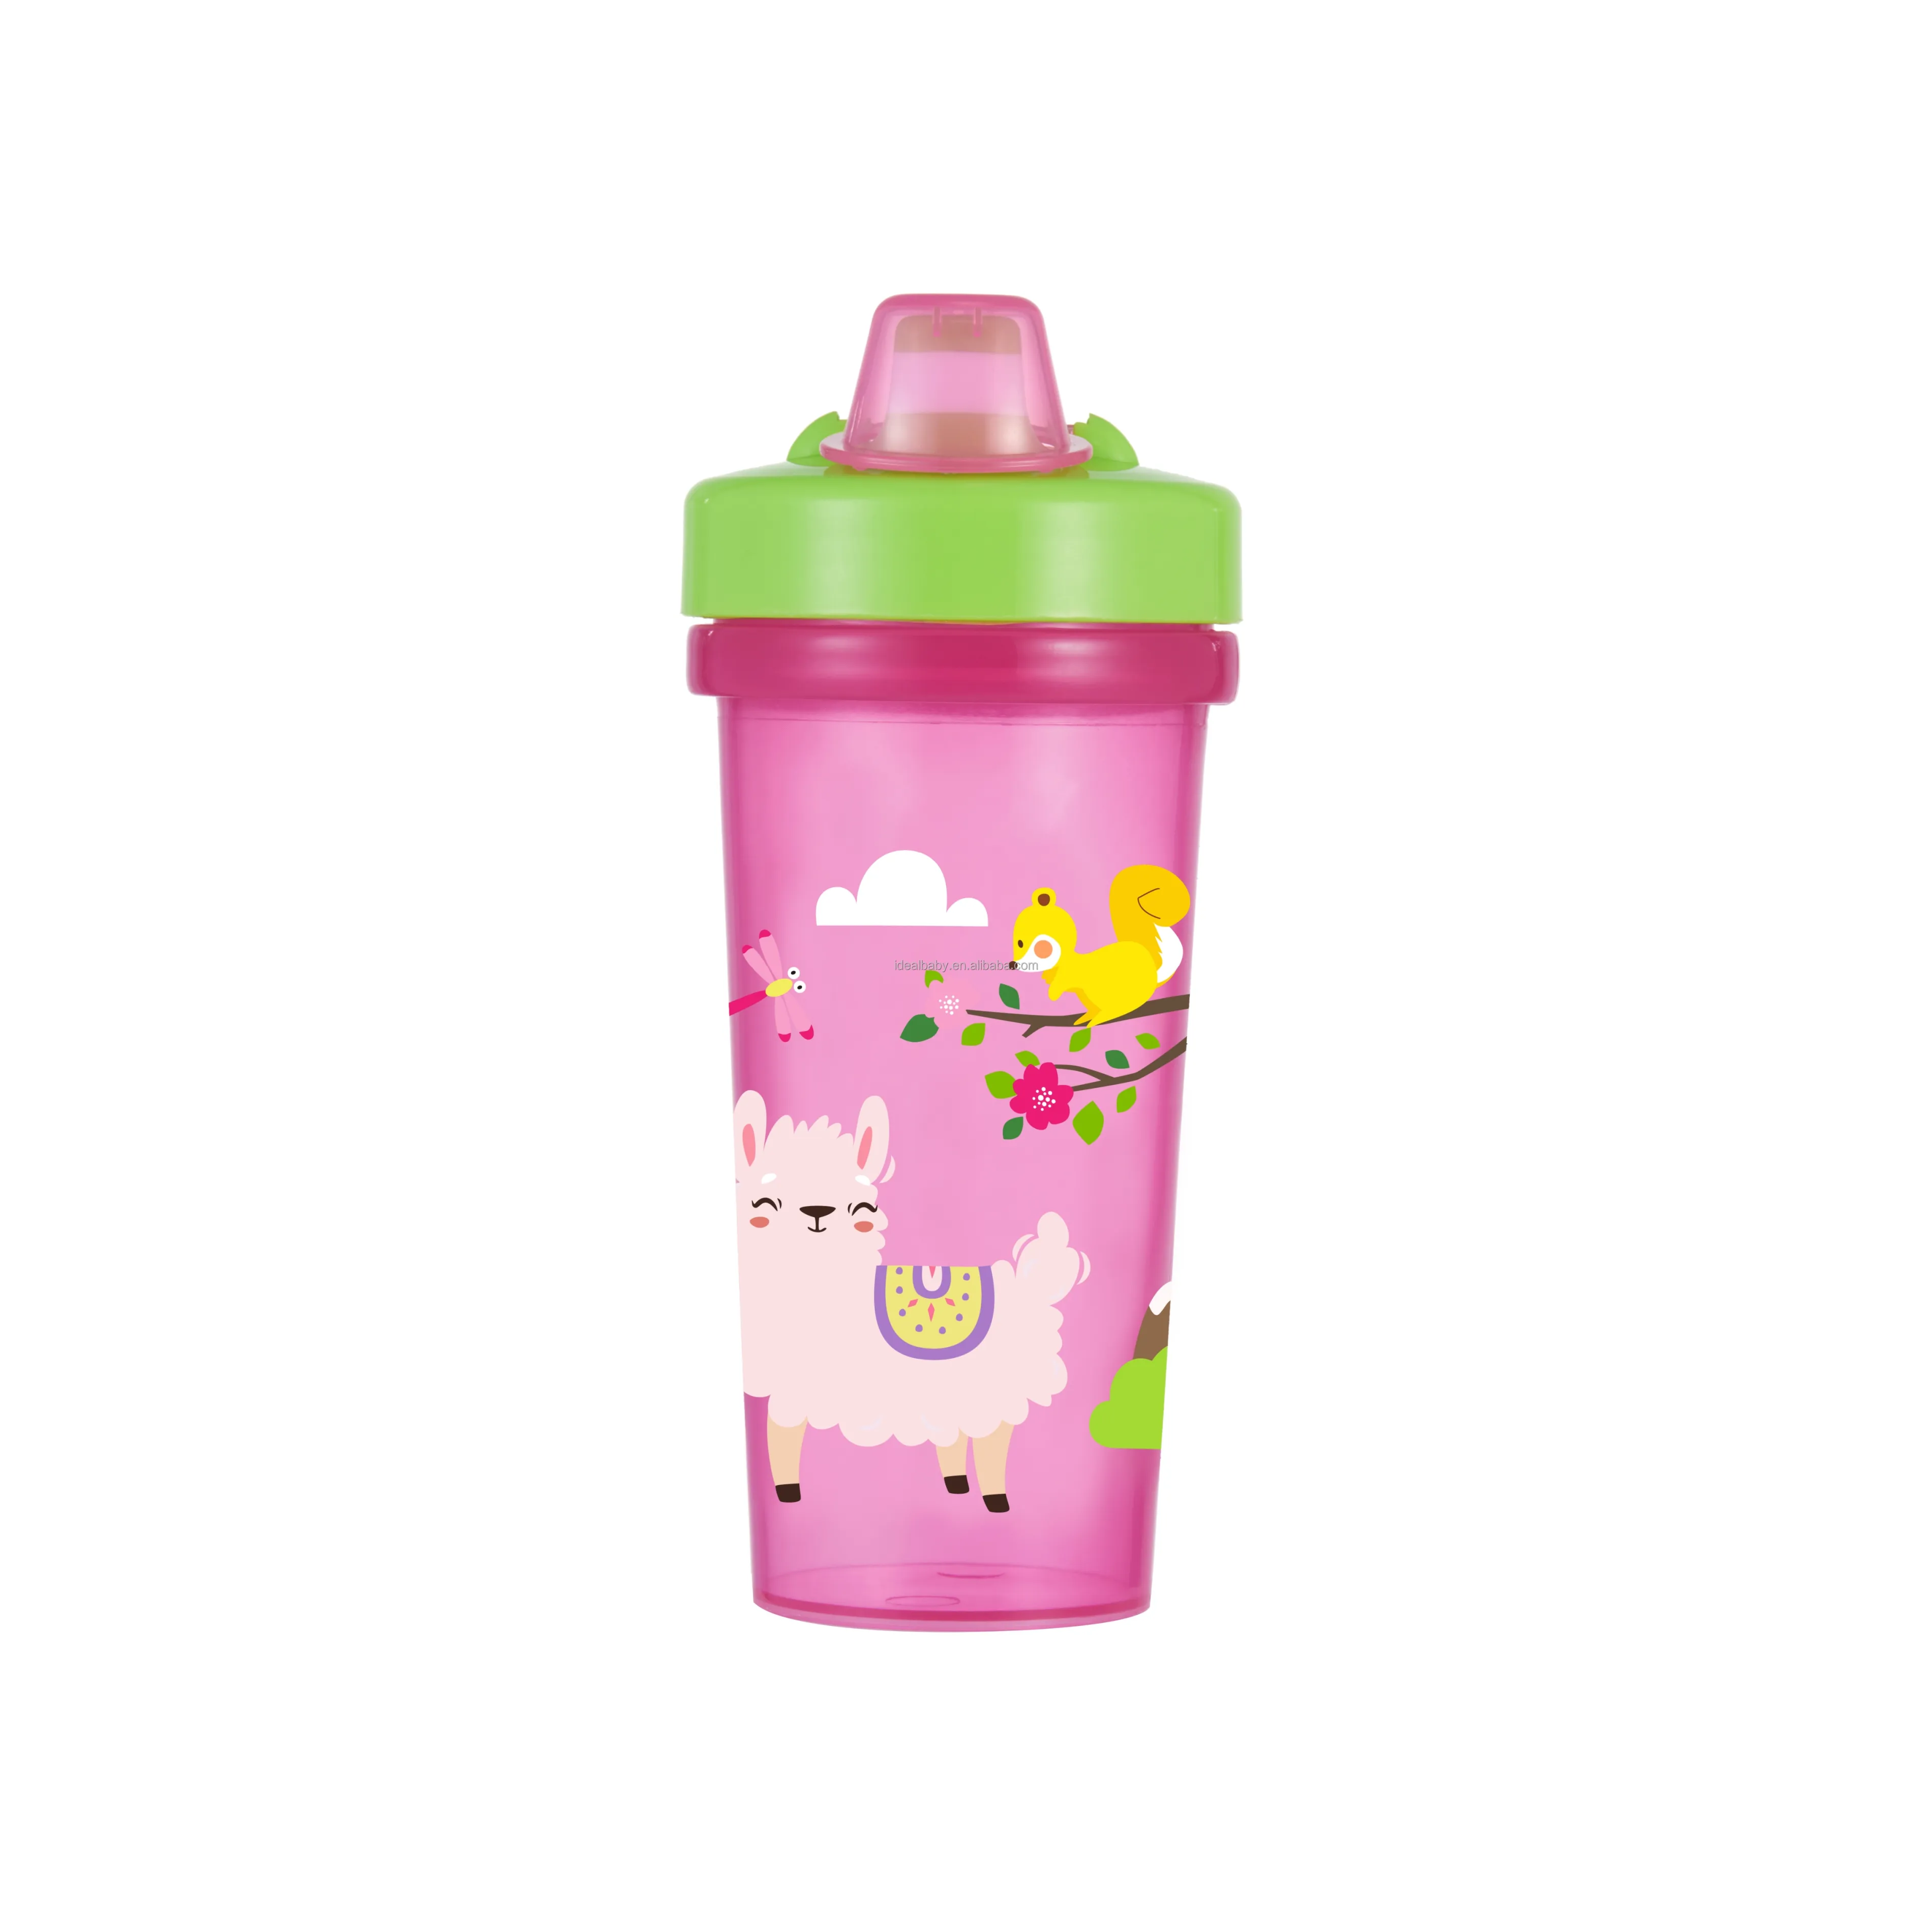 12oz/350ml PP Baby spout cup Baby Cup Baby Training Cup